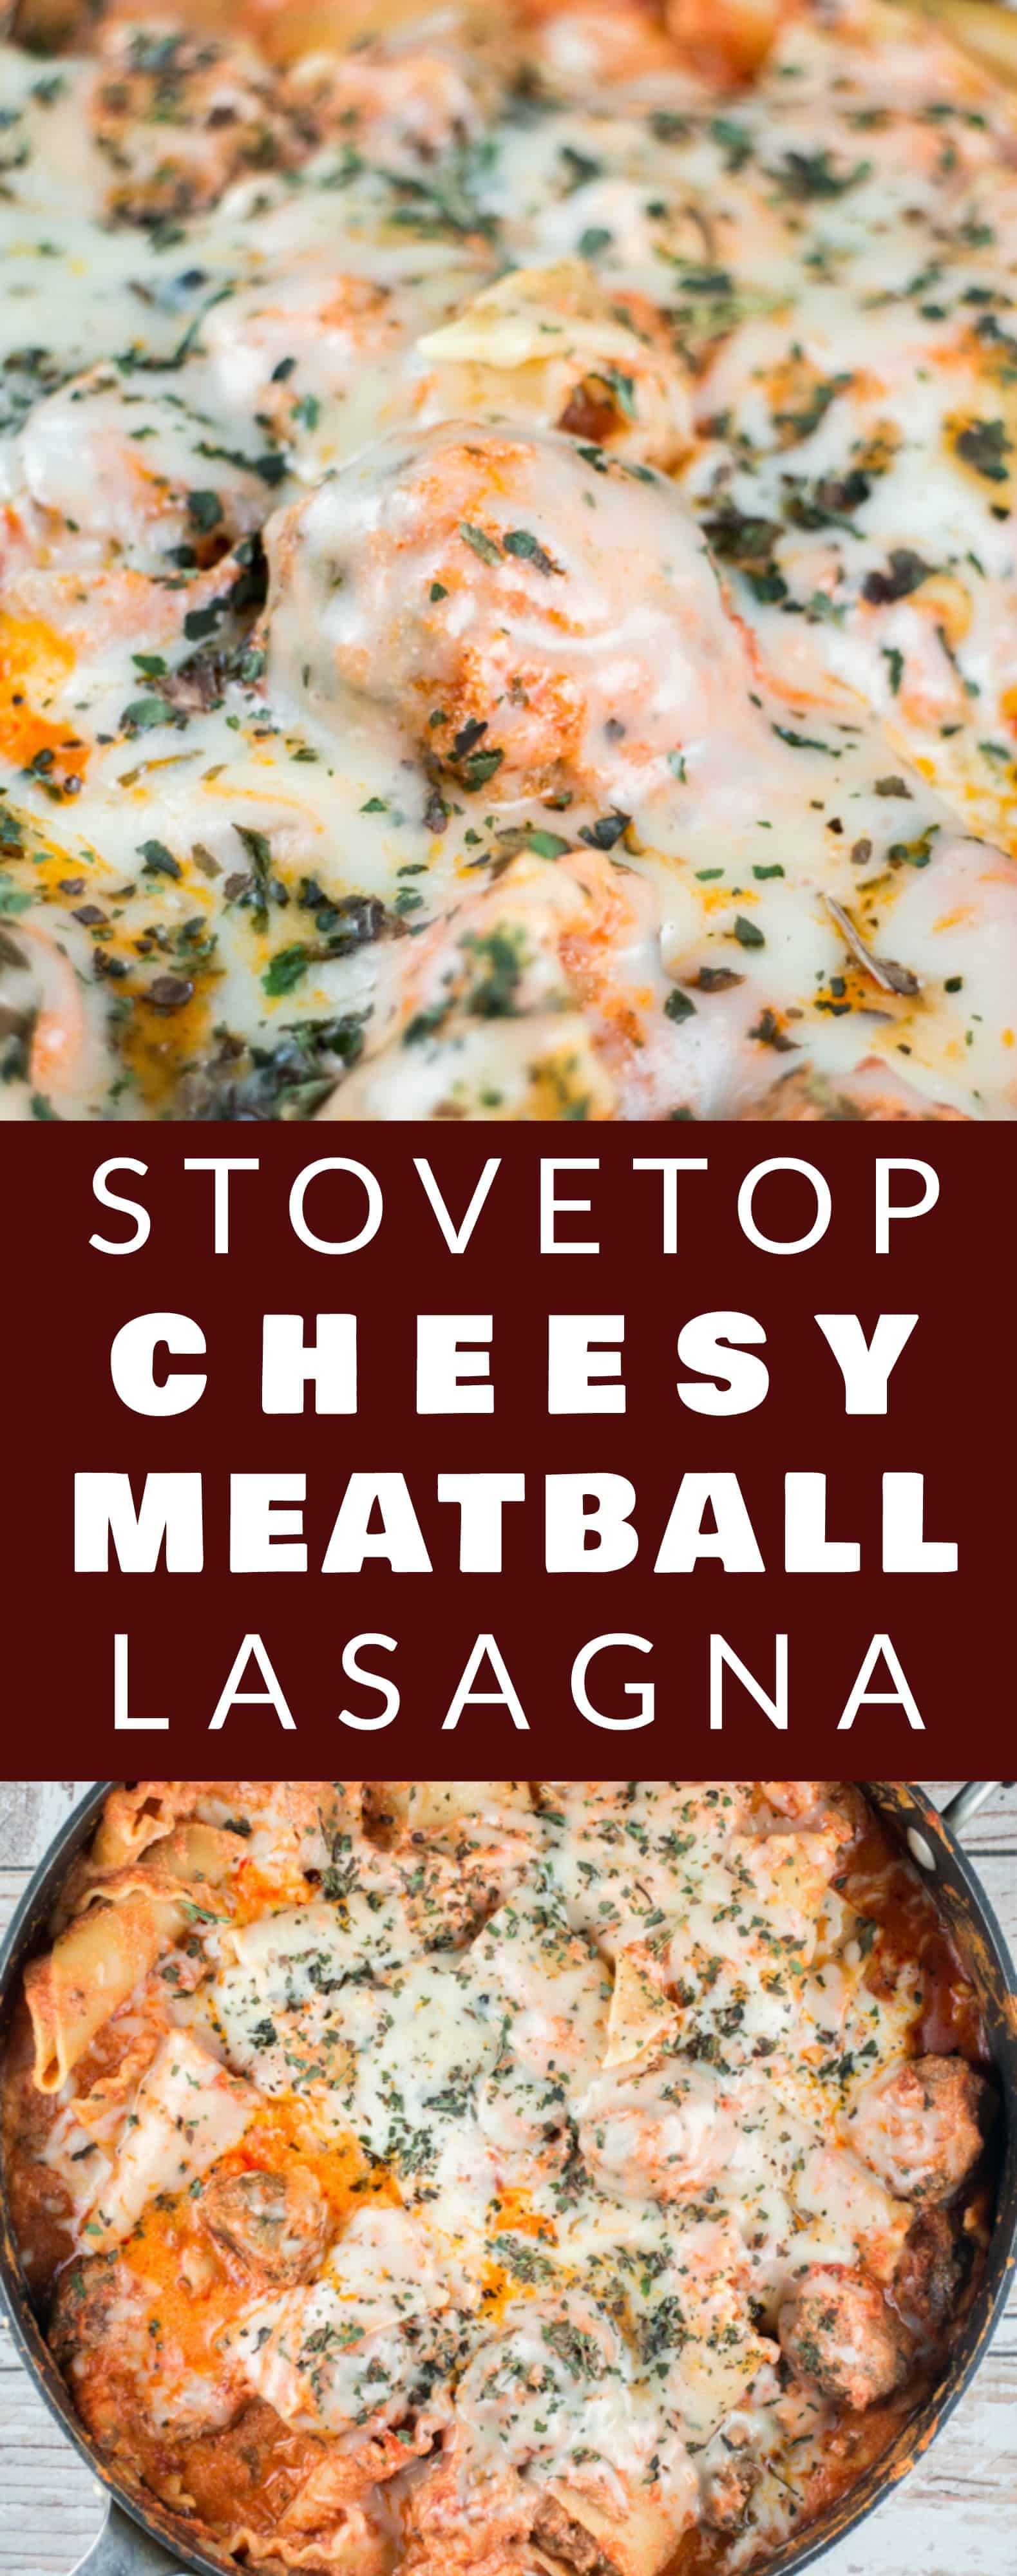  CHEESY STOVETOP Meatball Lasagna Skillet! This quick and easy stovetop lasagna recipe includes ricotta and mozzarella cheese to make it extra cheesy! Ready in 25 minutes!